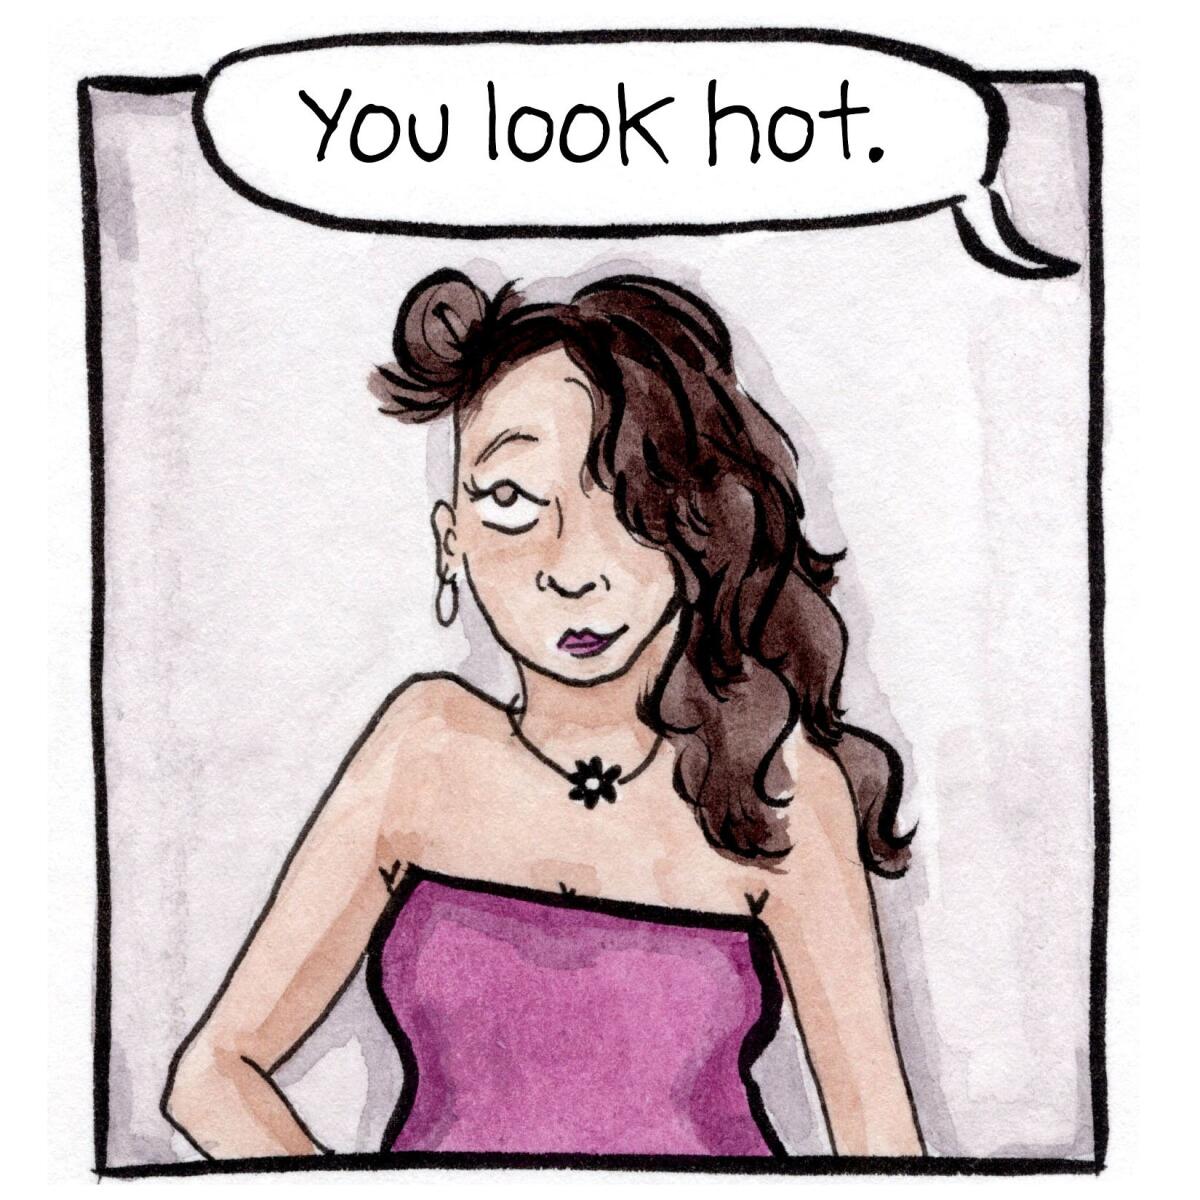 Someone says, "You look sexy," to a young woman wearing makeup and a pink strapless top.